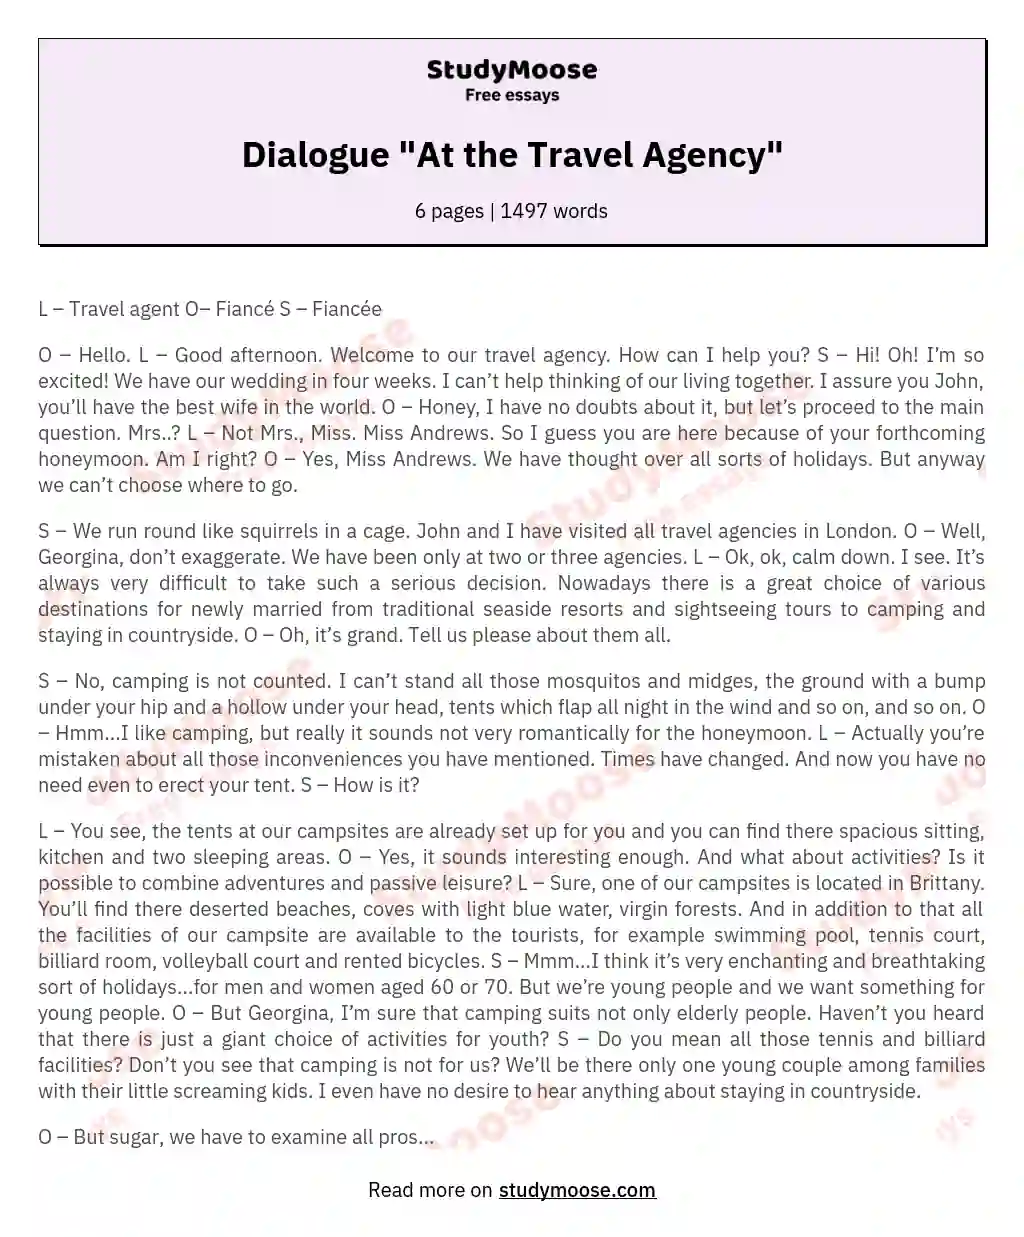 Dialogue "At the Travel Agency"